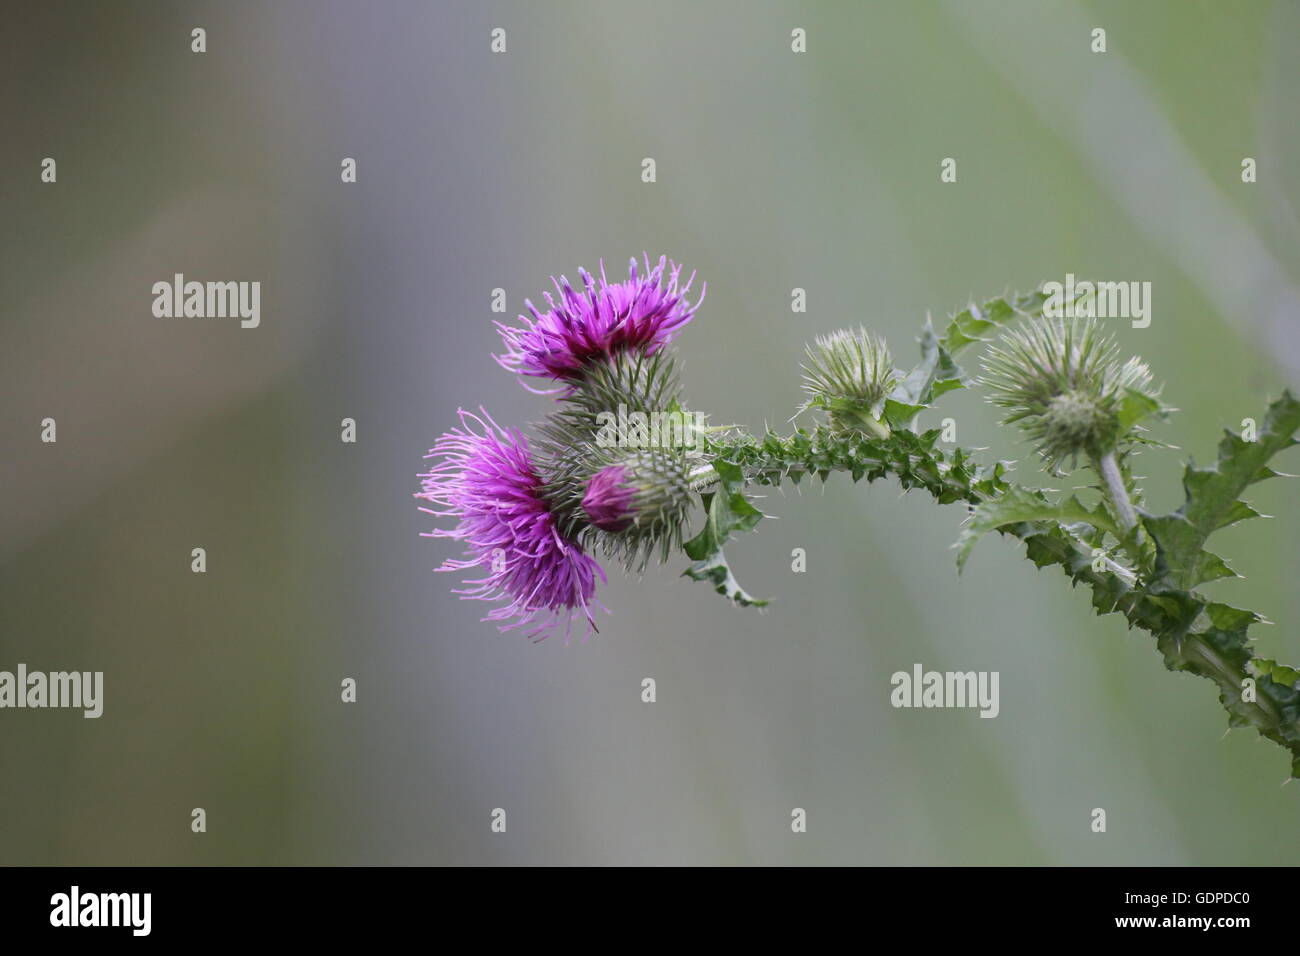 Thistle (Carduus x polyacanthus, hybrid from welted thistle - C. crispus and musk thistle - C. nutans). Stock Photo